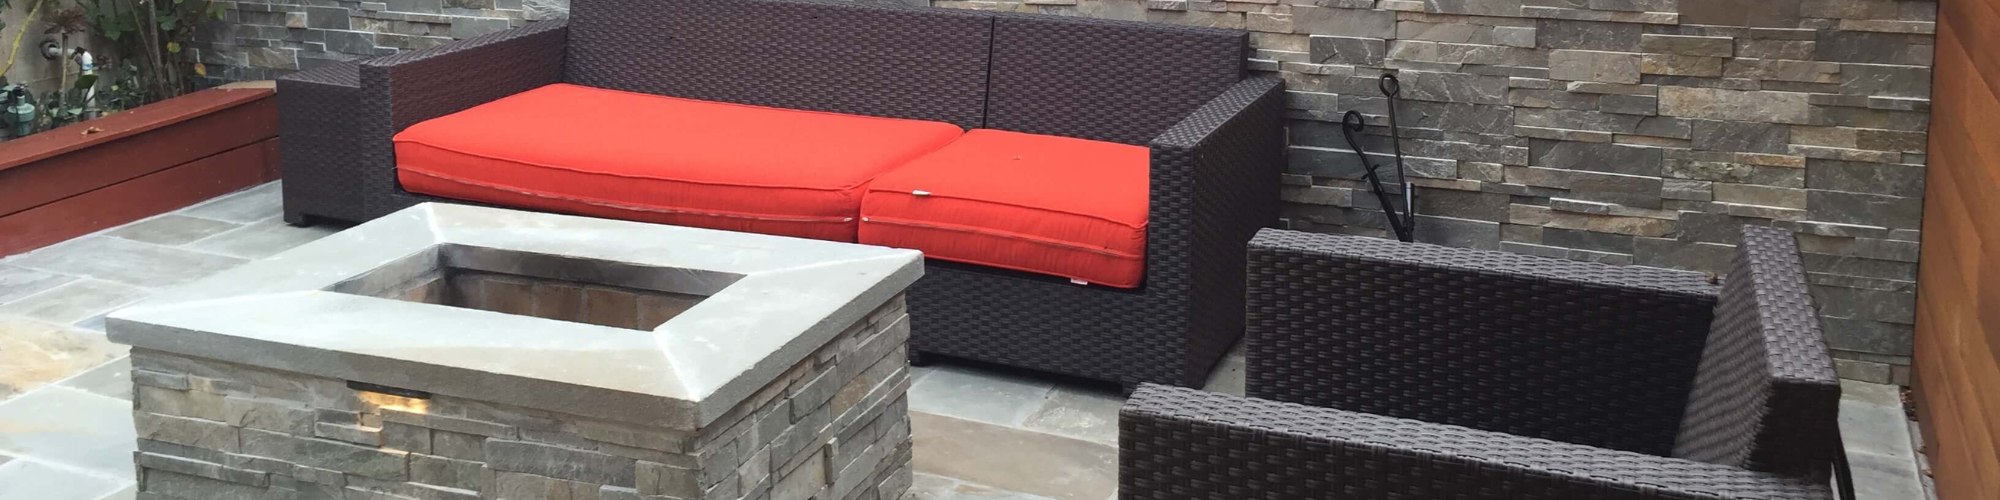 Masonry contractor services - decorative retaining walls and bespoke stone firepit